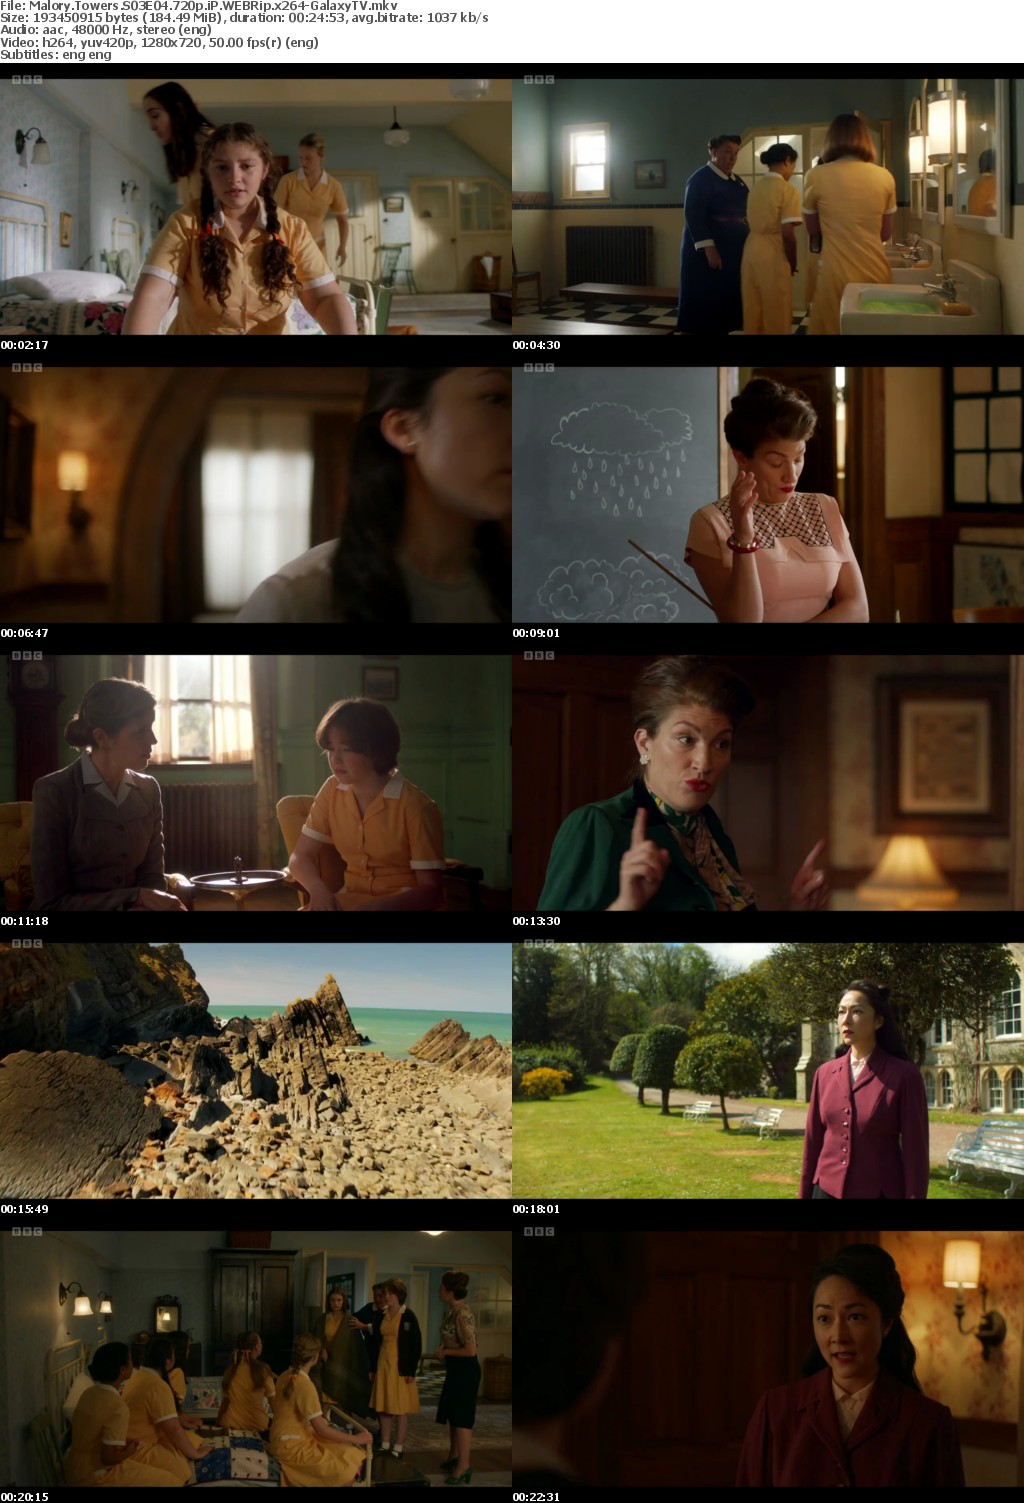 Malory Towers S03 COMPLETE 720p iP WEBRip x264-GalaxyTV